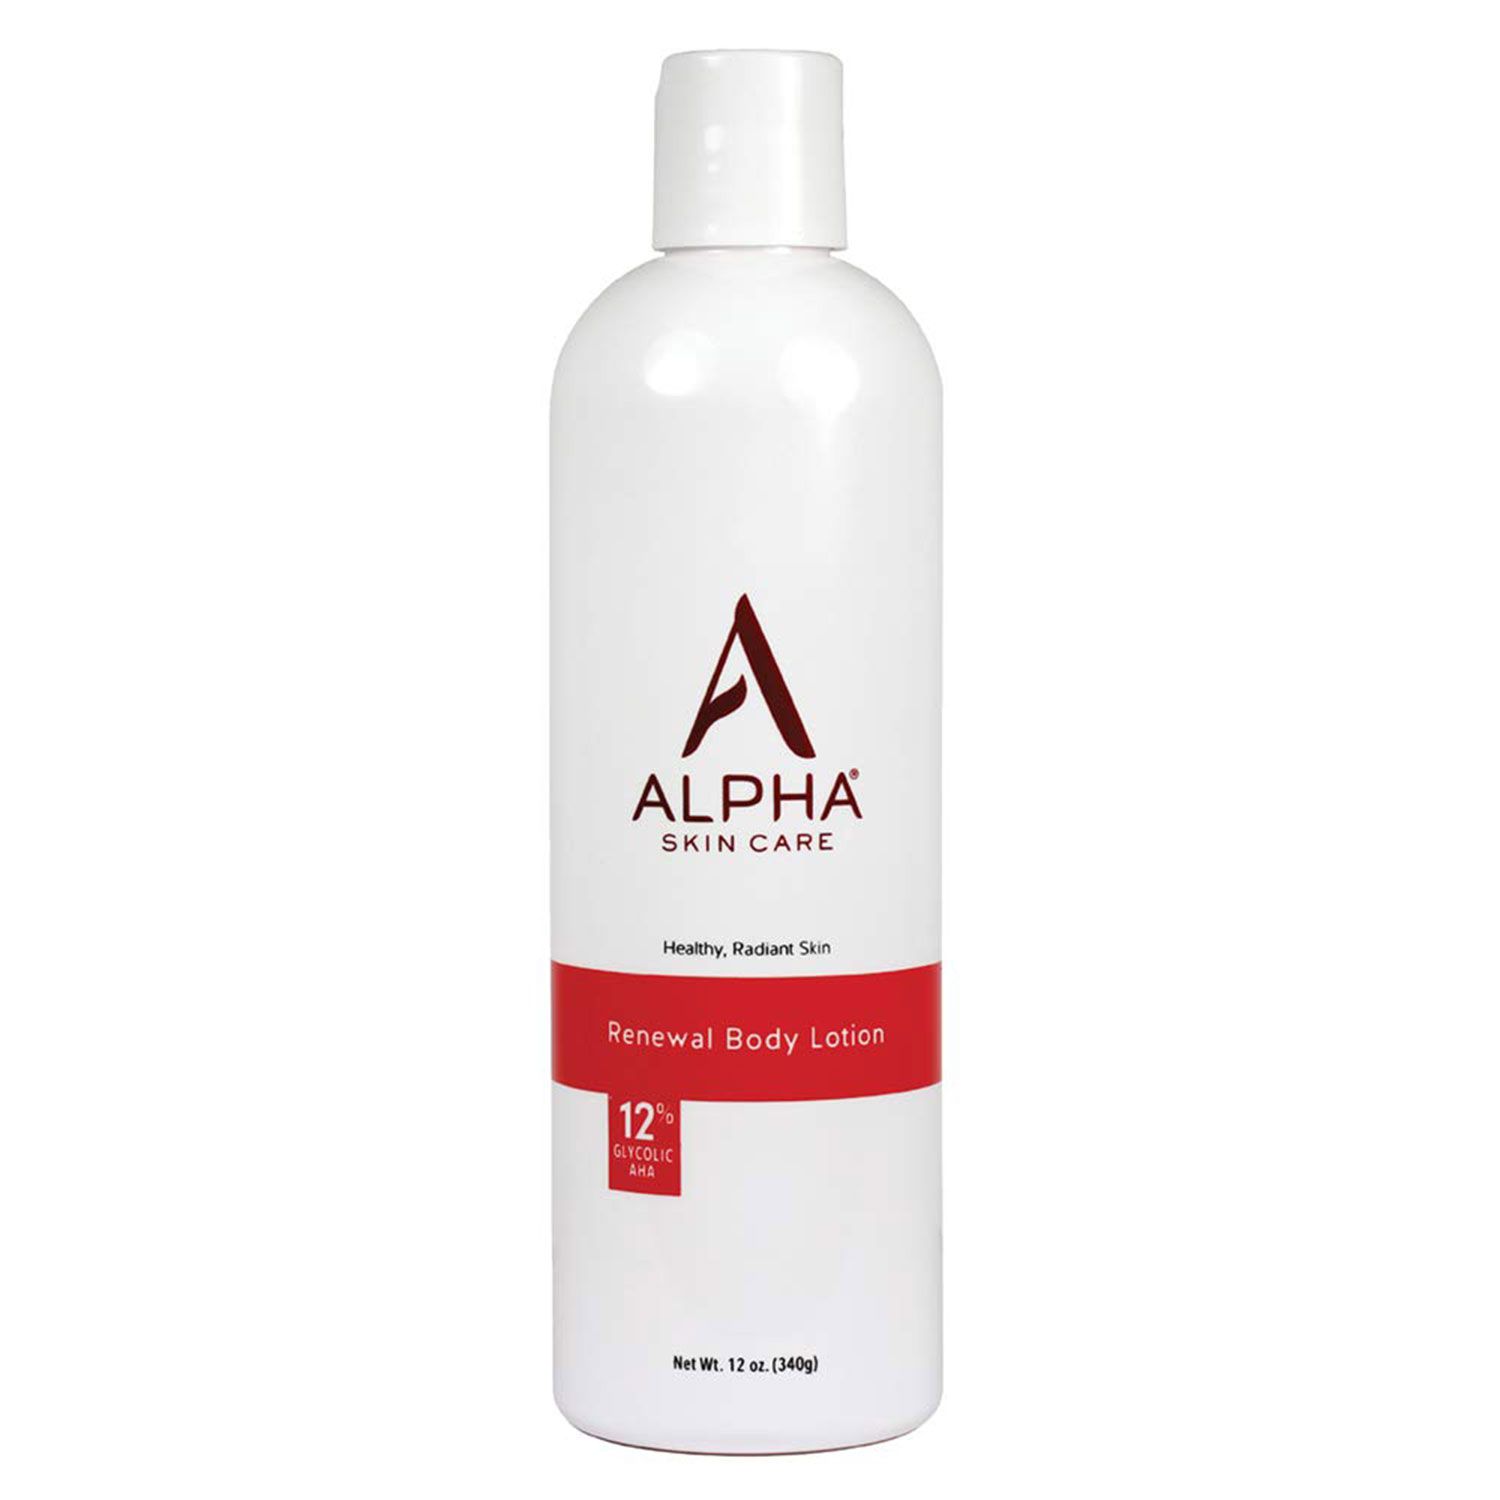 Best Anti-Aging Products on Amazon: Alpha Skin Care Renewal Body Lotion